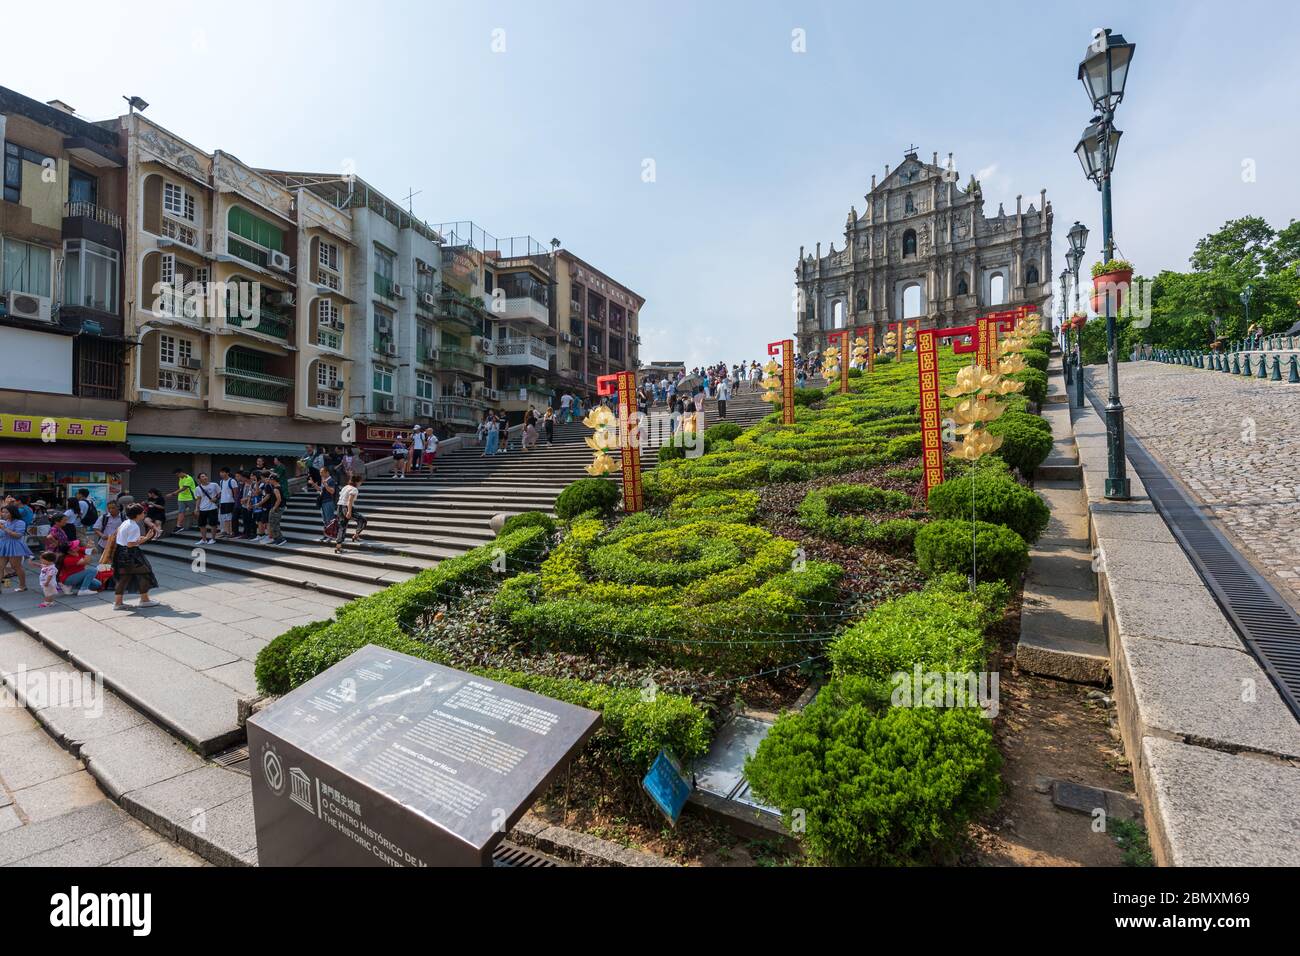 Macau, China - May 16, 2020: It is a popular tourist attraction of Asia. View of the Ruins of St. Paul's Cathedral in Macau. Stock Photo